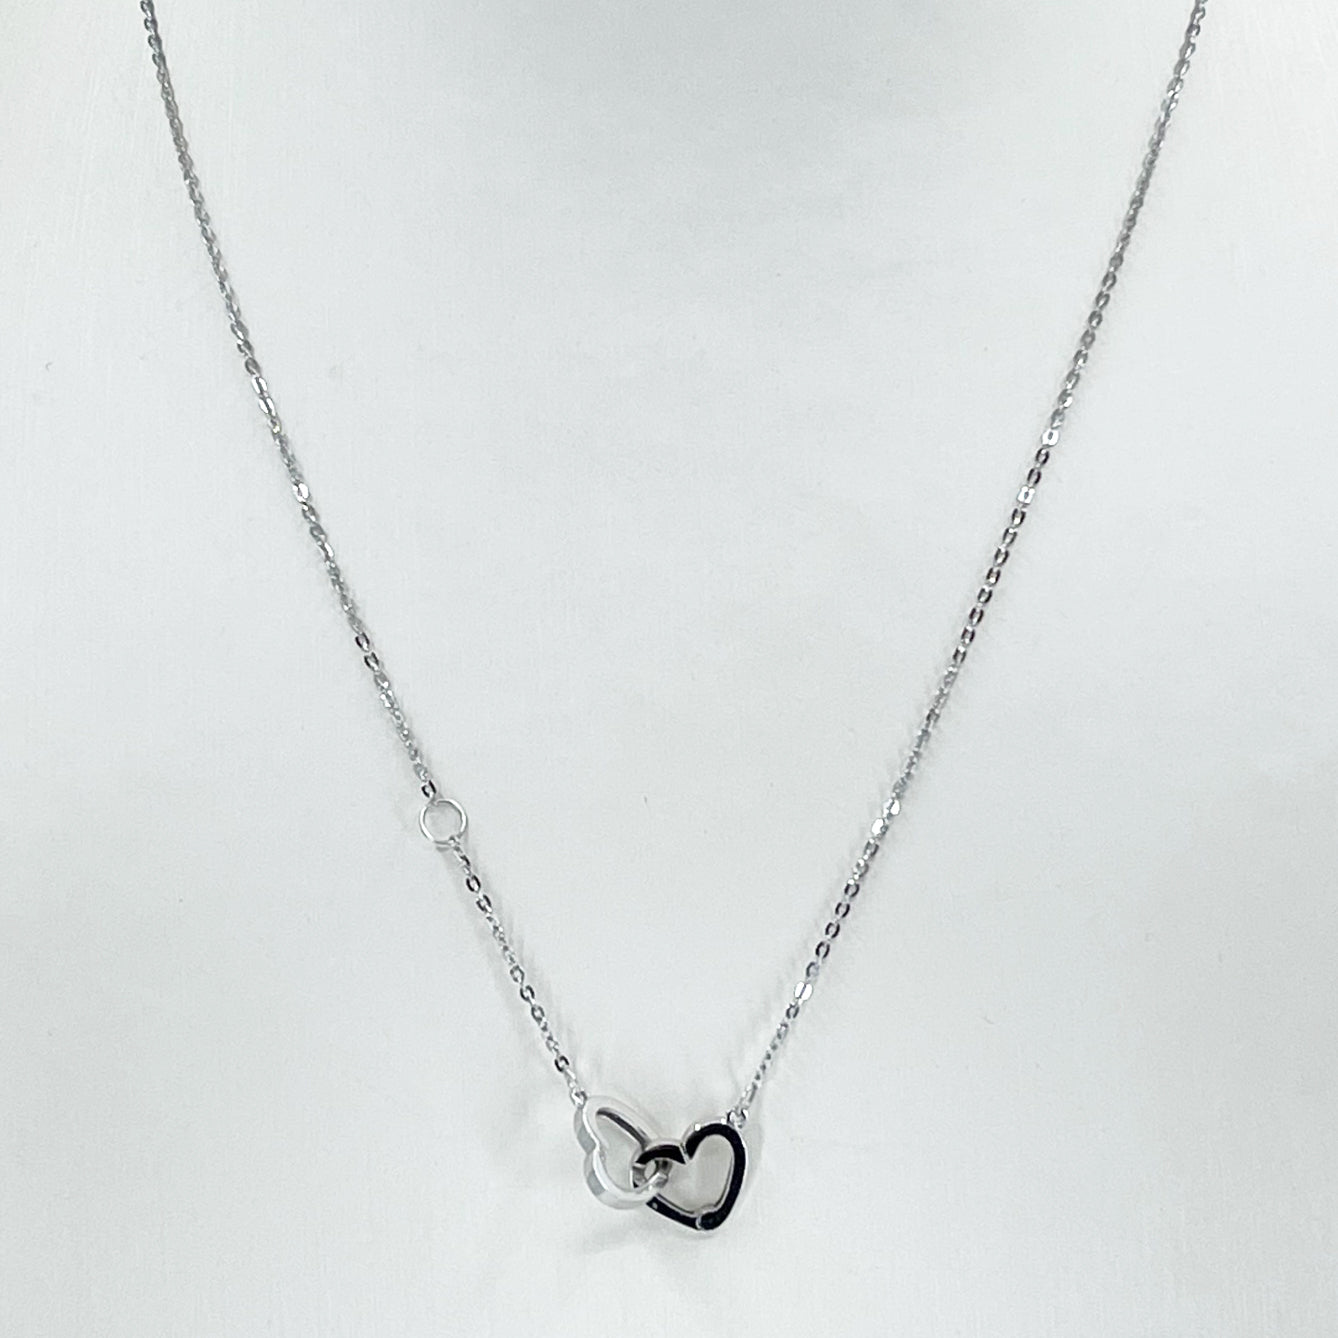 18K Solid White Gold Round Link Chain Necklace with Double Heart Pendant 17